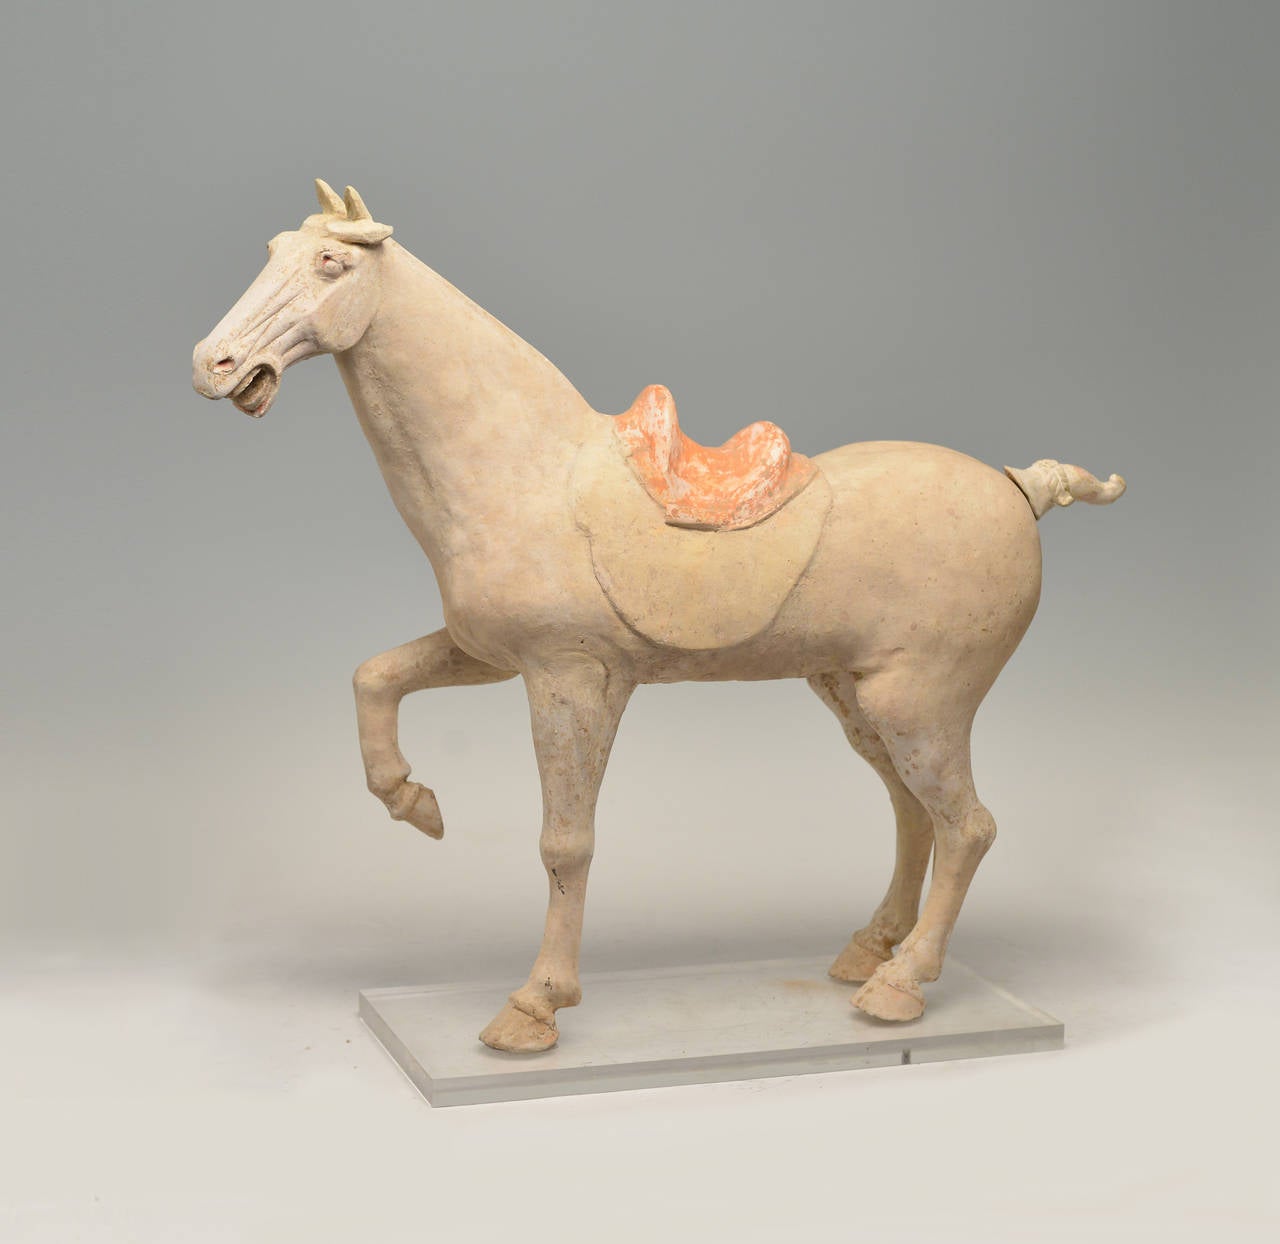 A painted pottery figure of a prancing horse, with right leg raised and head turned towards the left, the head well modelled with crisp features below pricked ears, saddle painted with cruciform motif, 8th century.